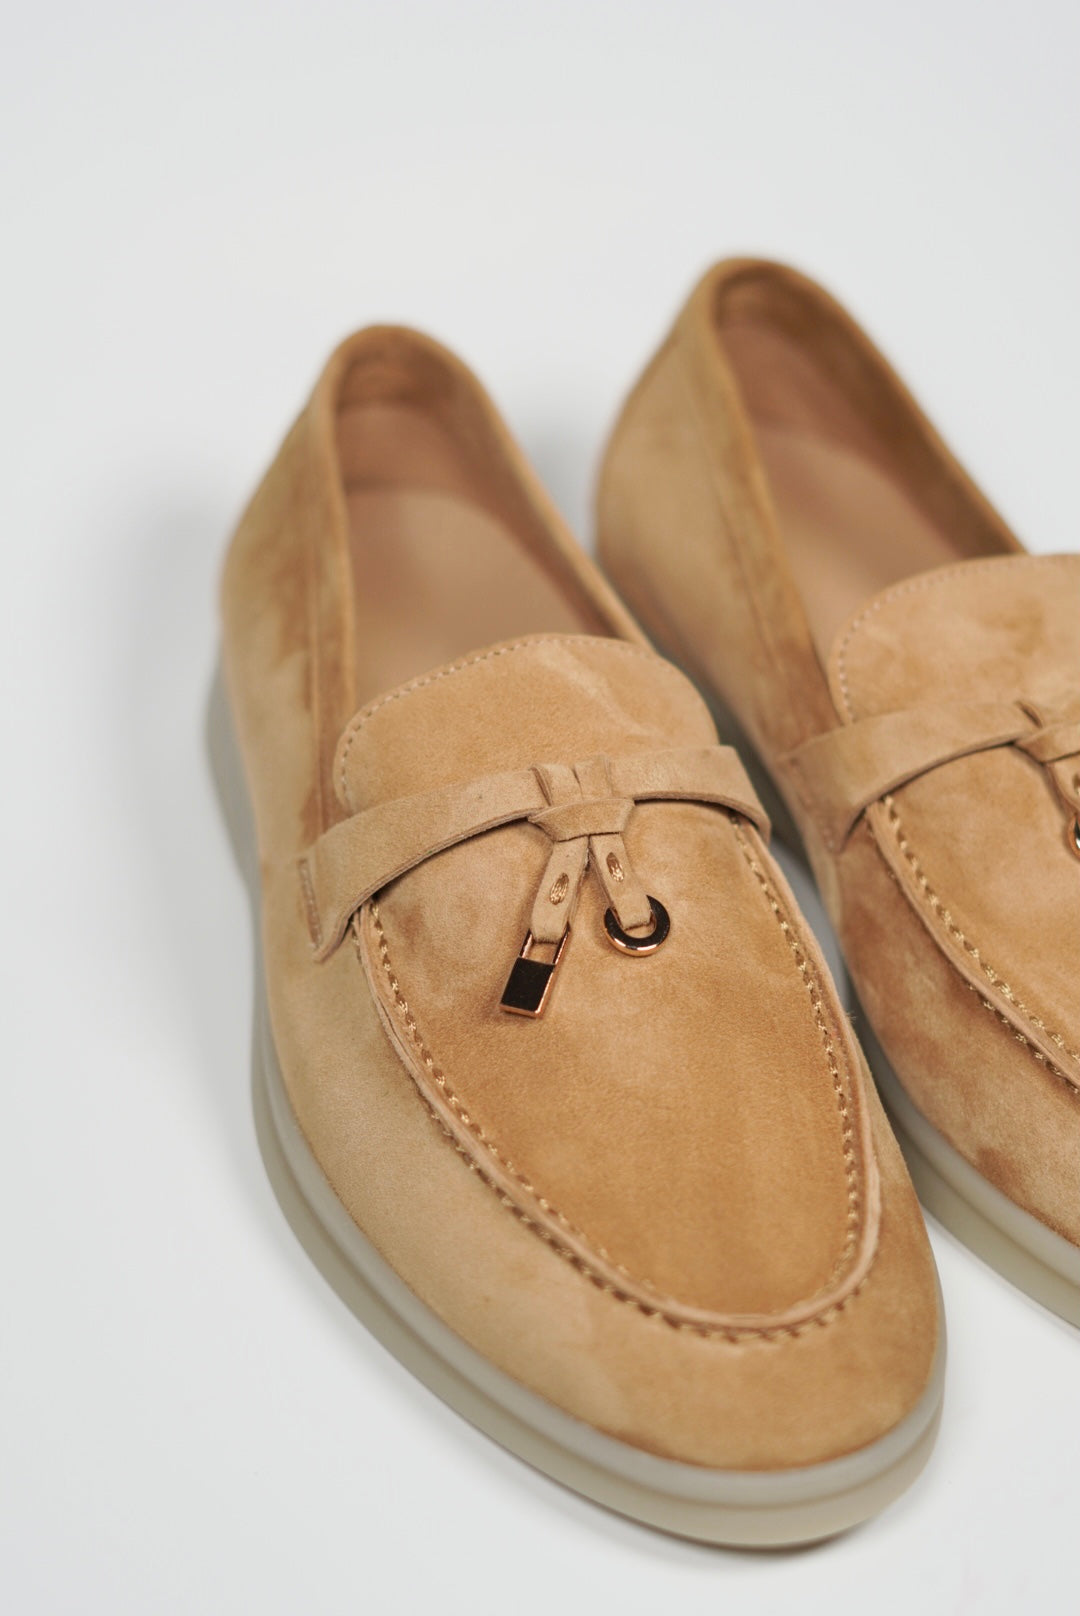 Women's Genuine Suede Loafers Moccasins Camel